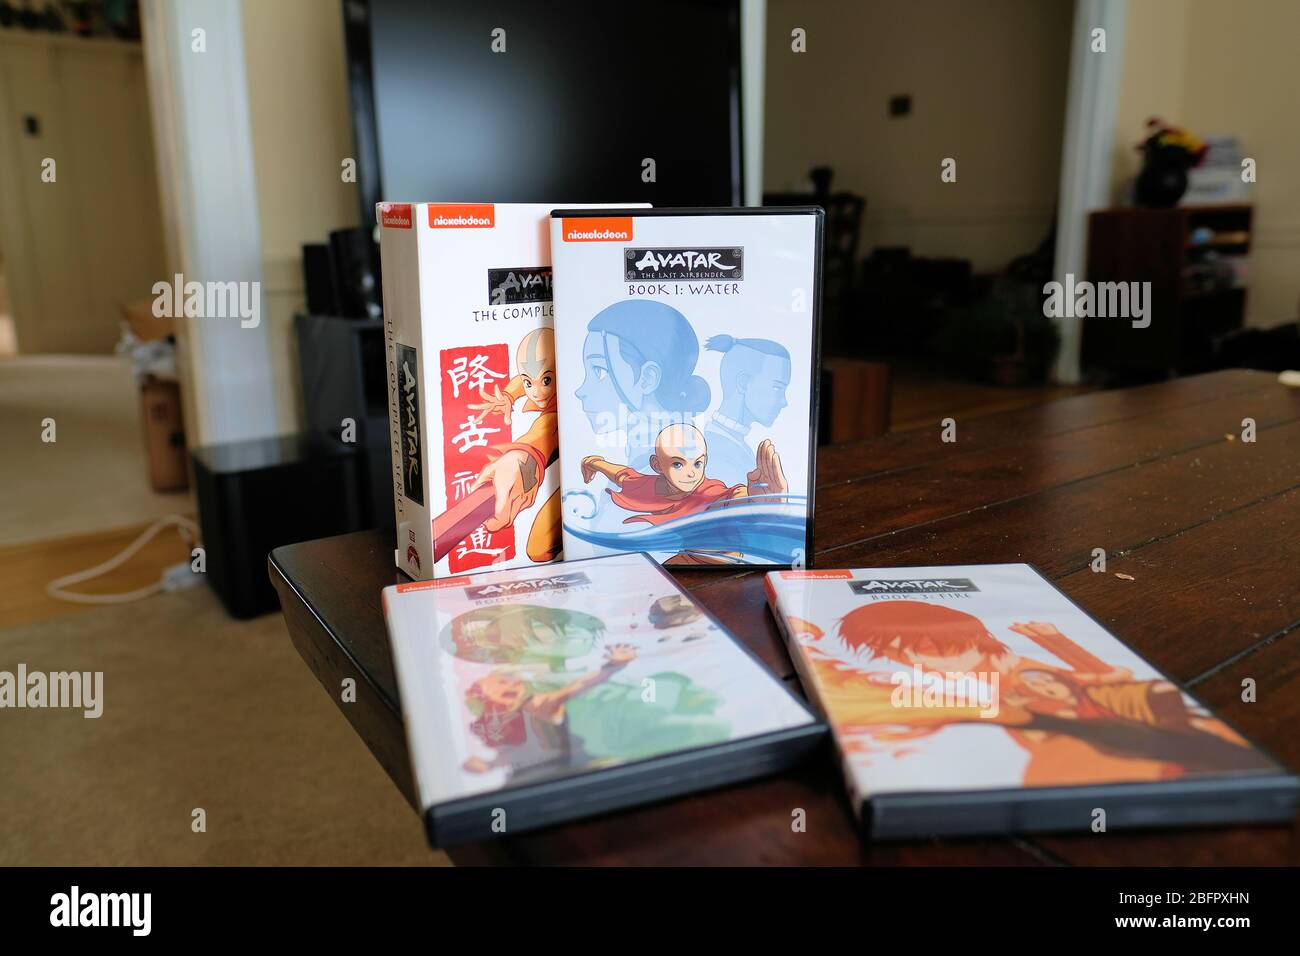 DVD box set of Nickelodeon's "Avatar - The Last Airbender: The Complete  Series" animated television show released in 2015 on a living room at home  Stock Photo - Alamy